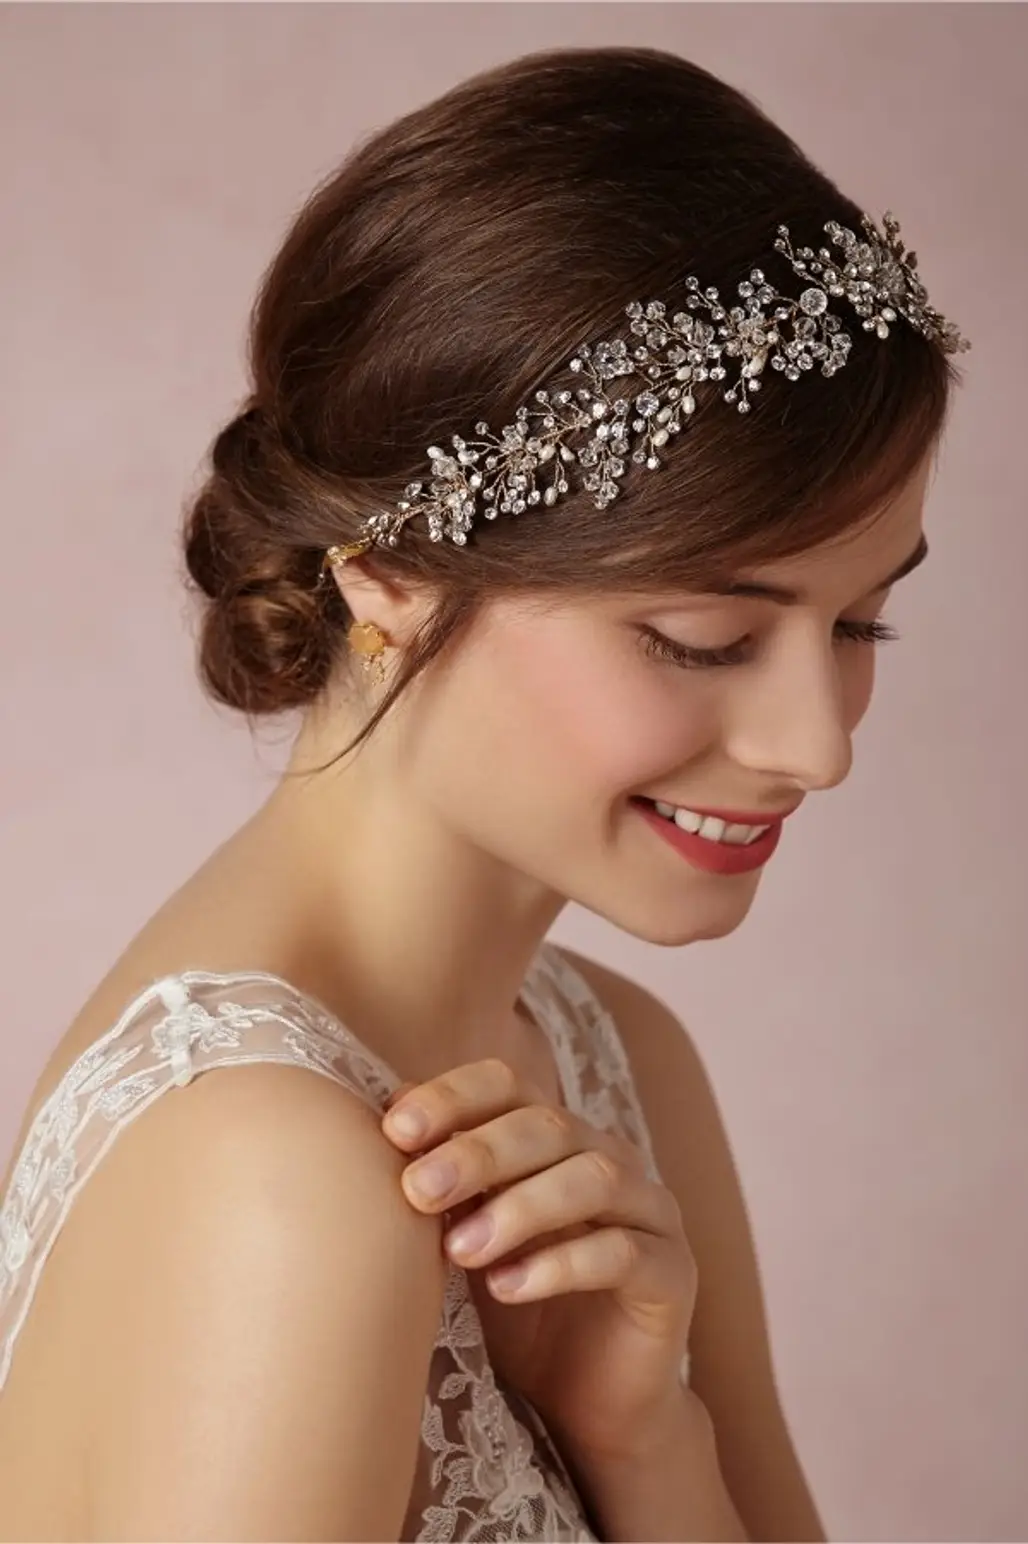 Accessorize with a Short Veil (or Skip the Veil Altogether)